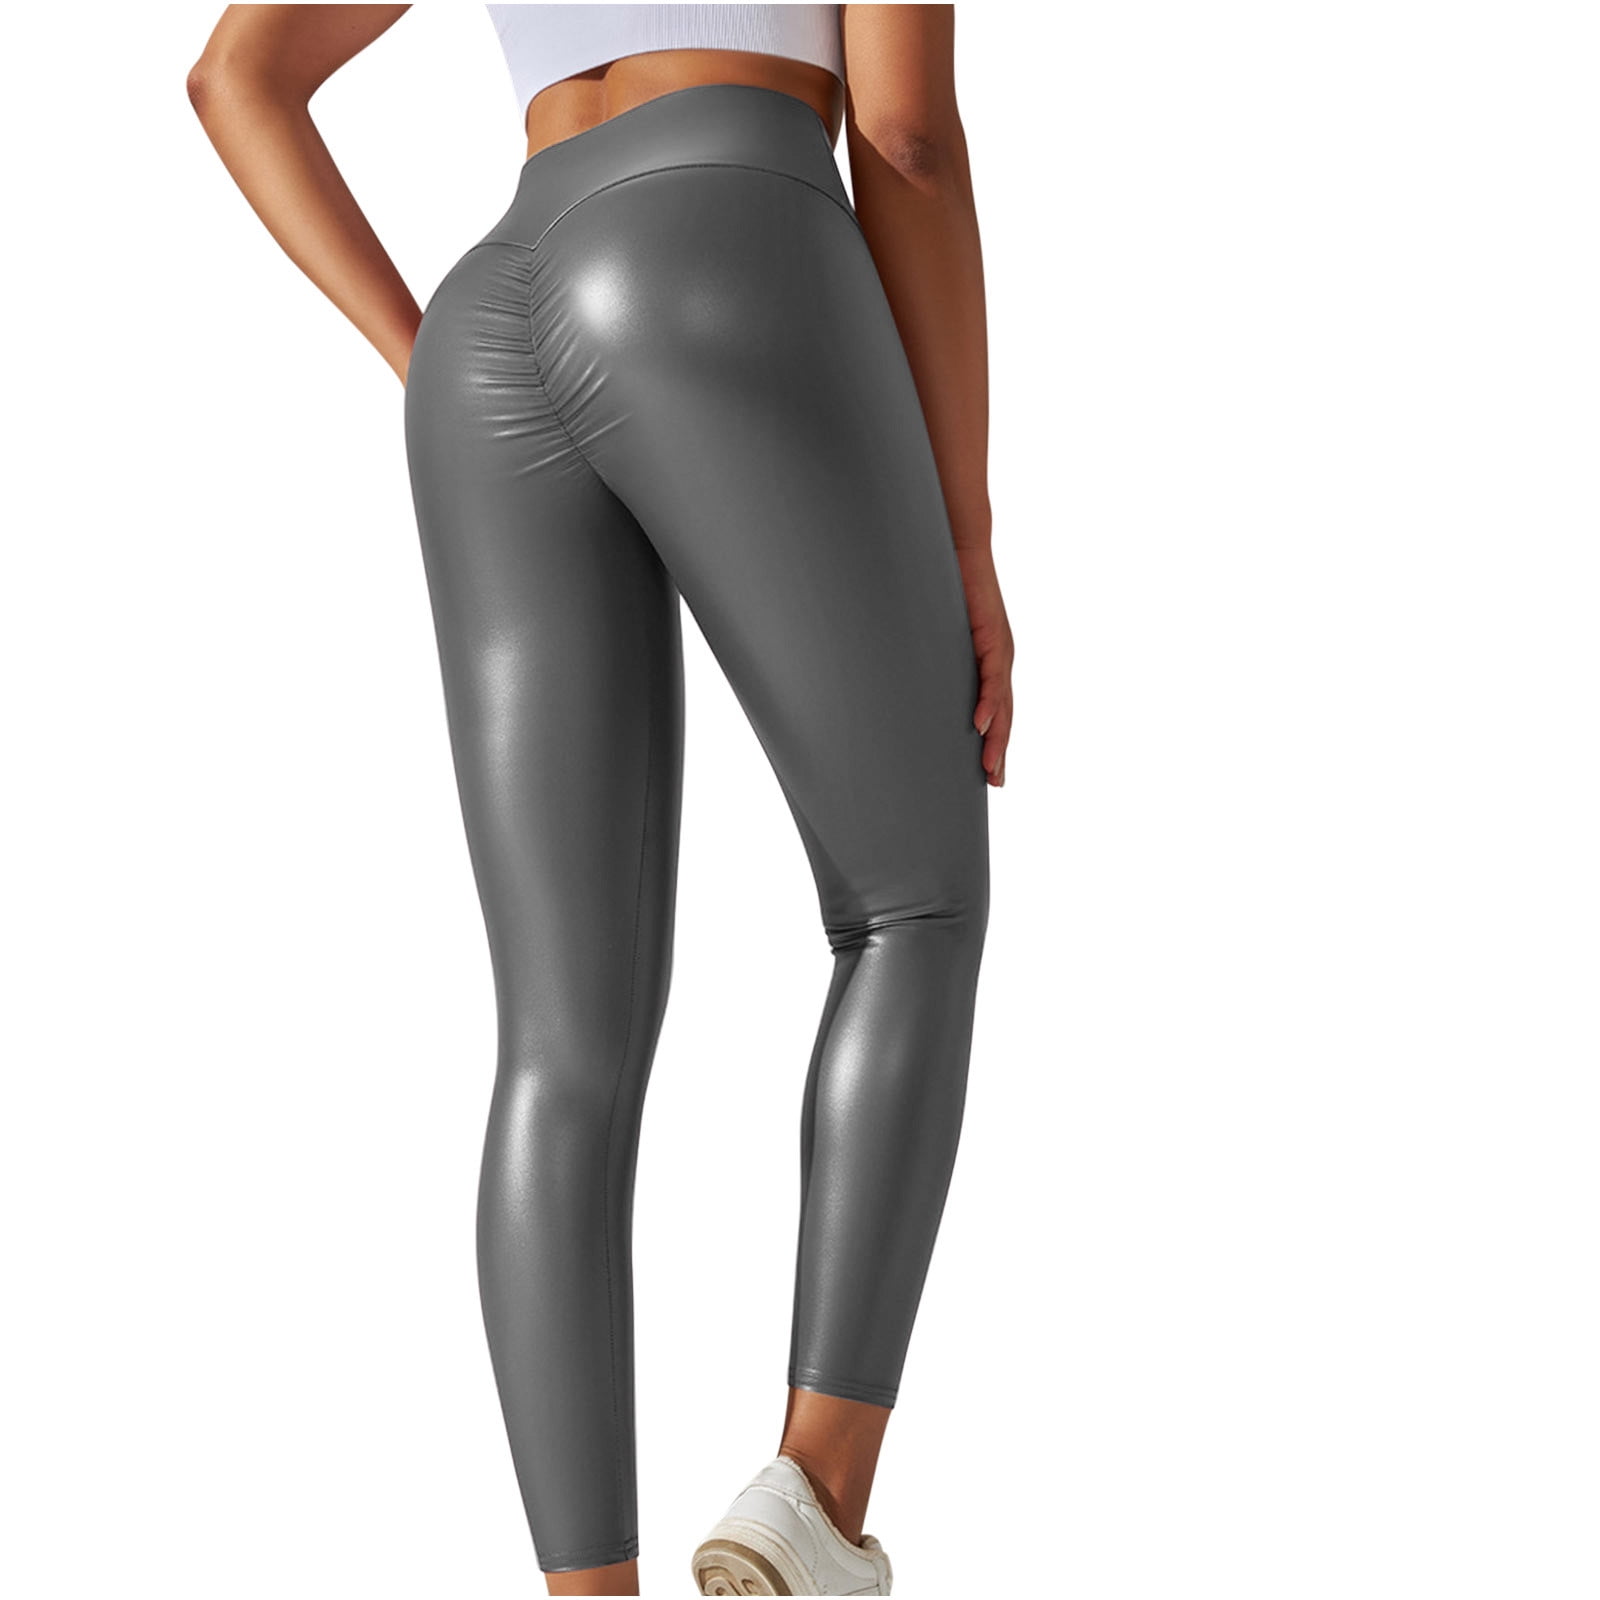 SUMDUINO Pants for Women Women's Sexy Leggings Plus Size Color Bottom Small  Feet Sports High Waist Thin Leather Pants